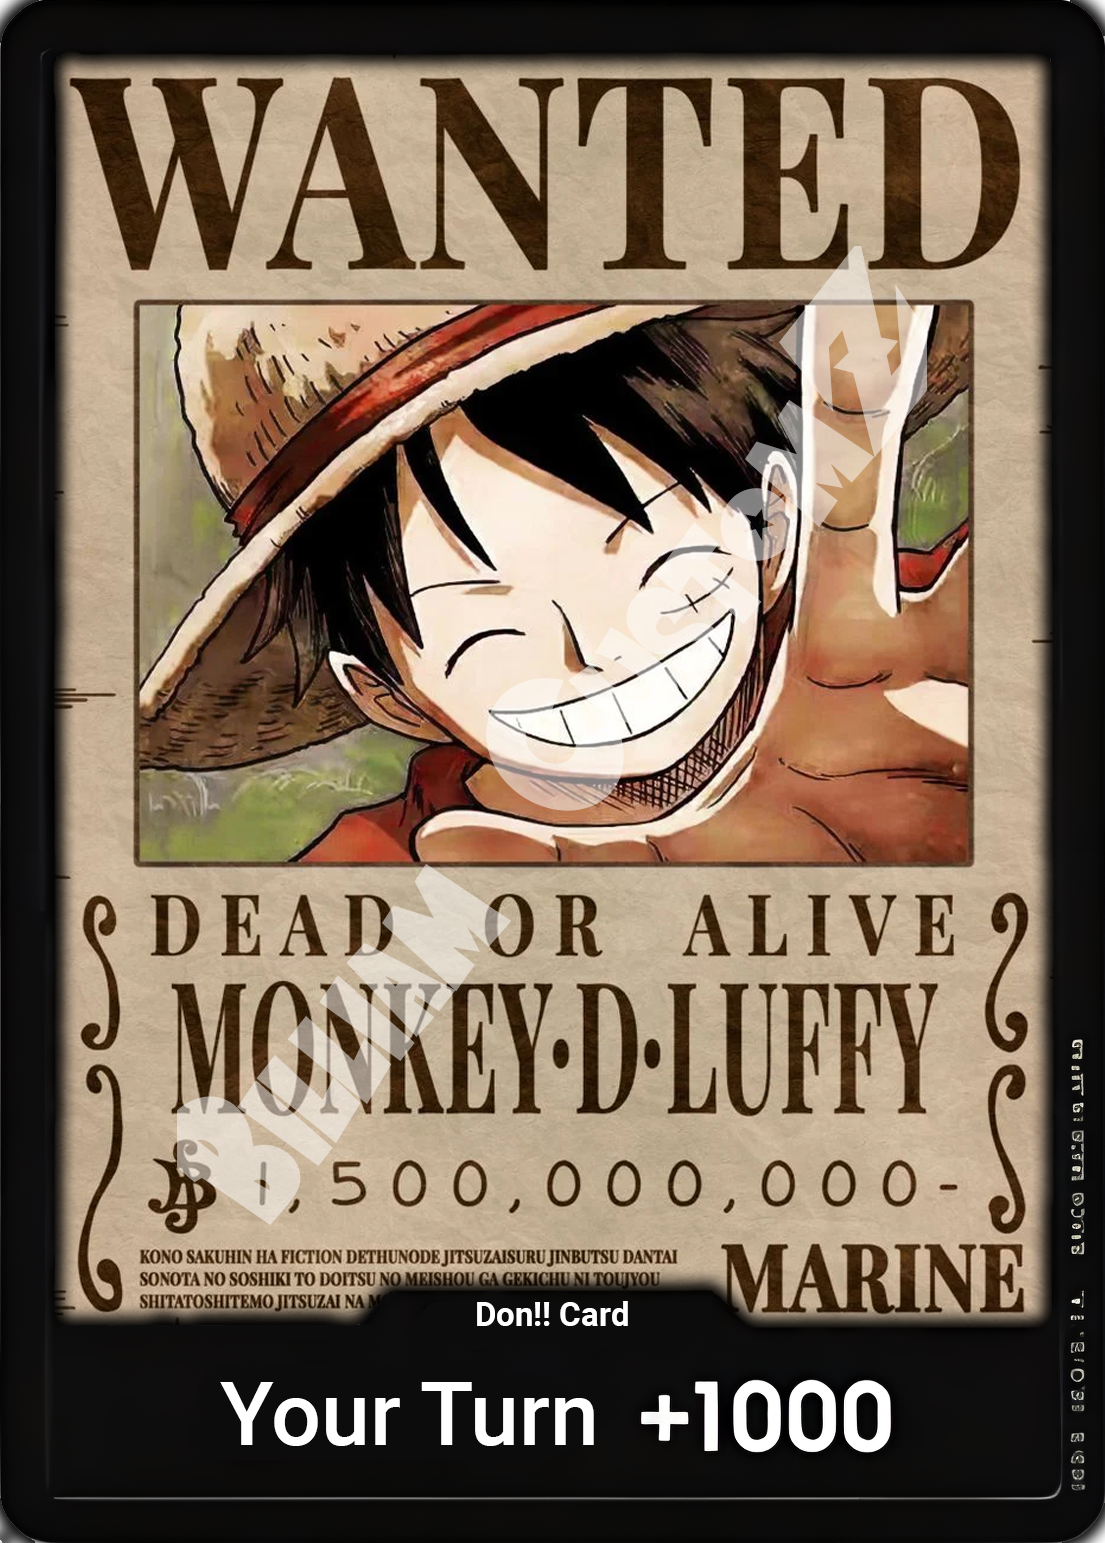 One Piece Monkey D Luffy Wanted Poster, monkey d luffy